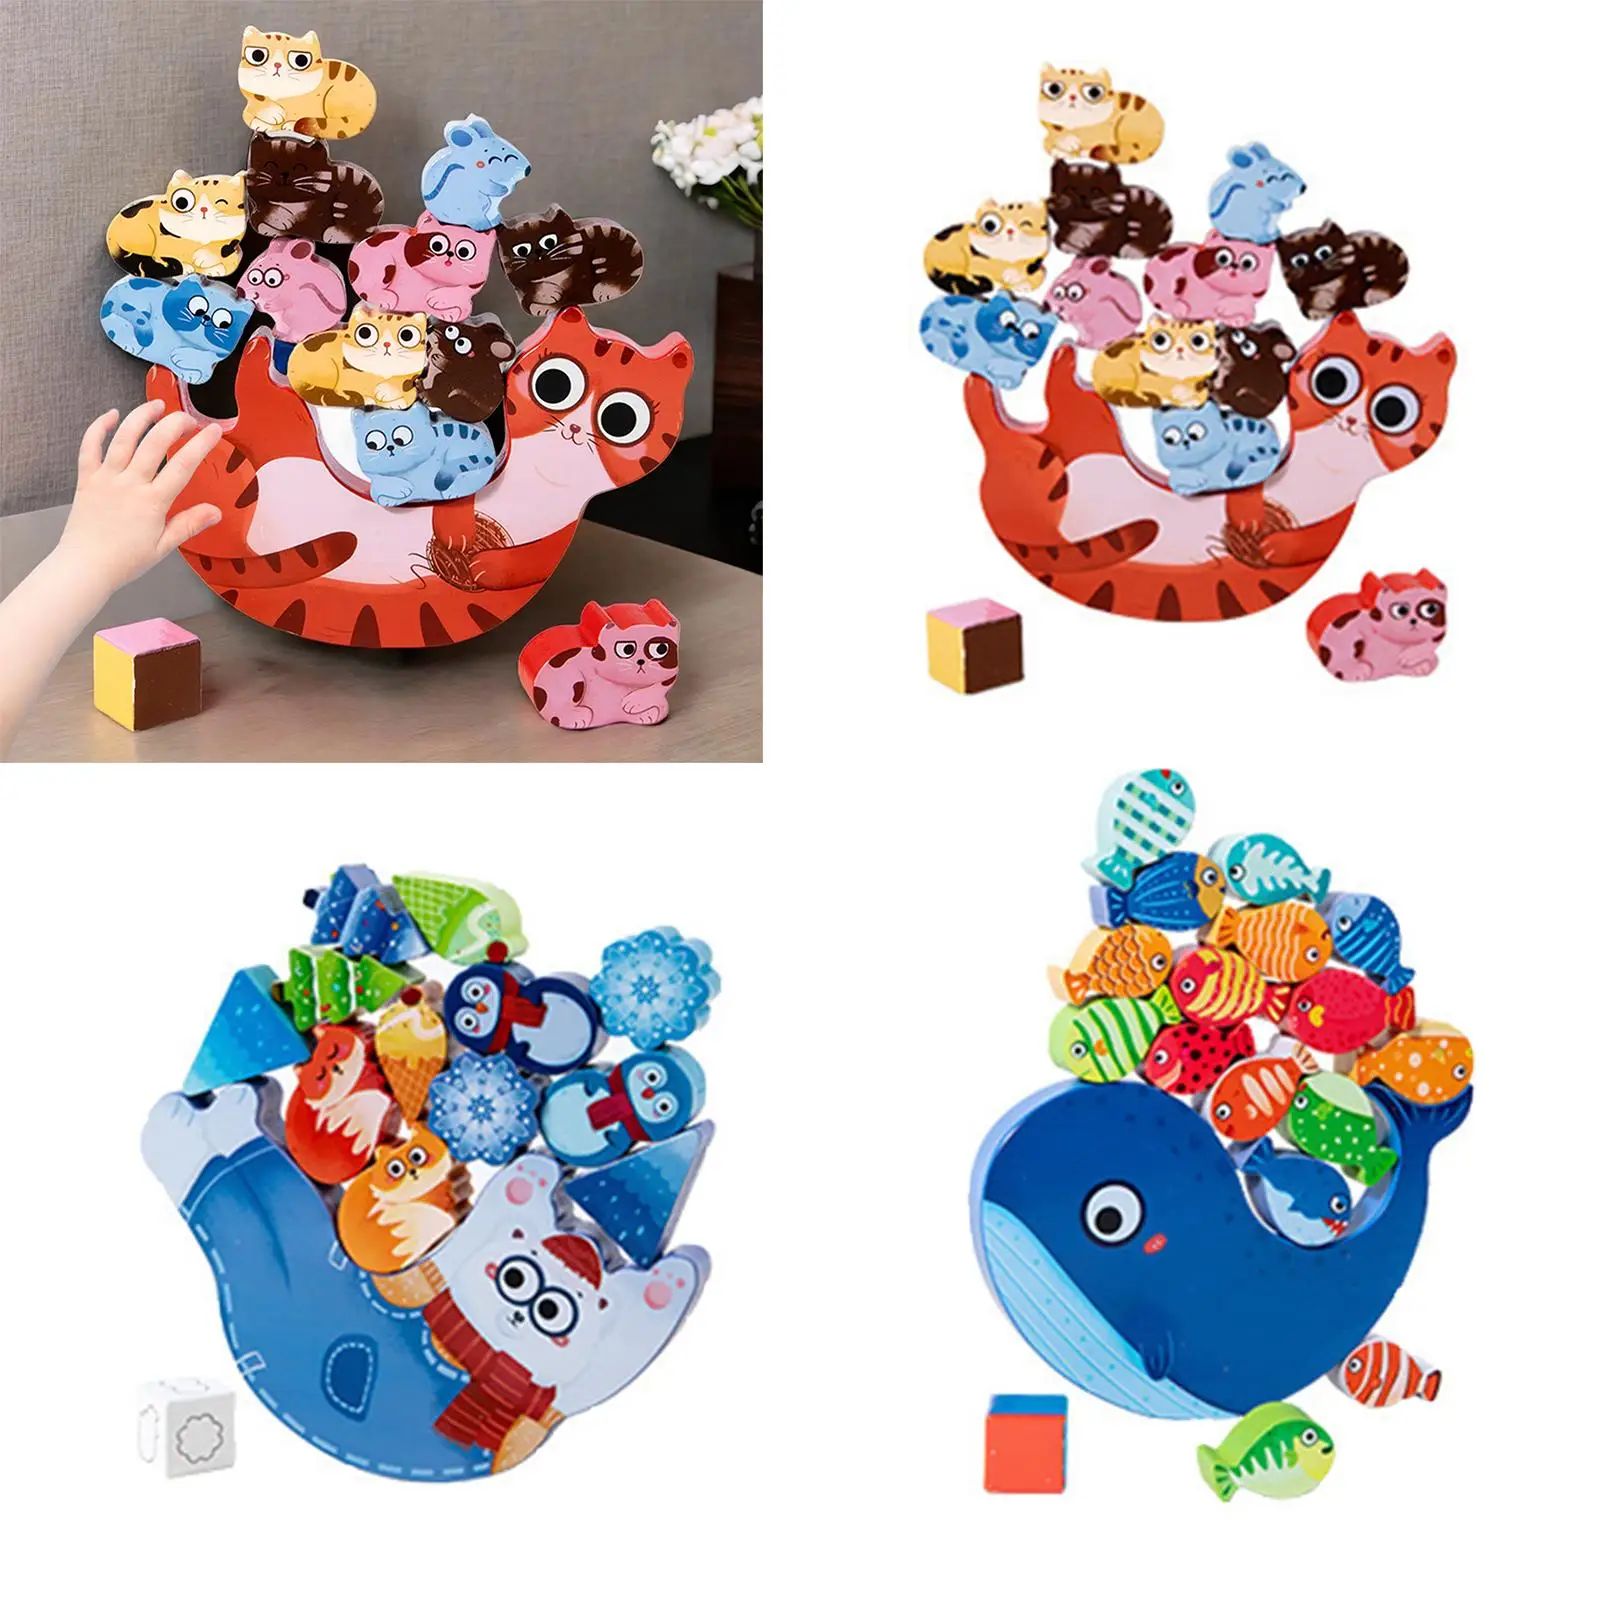 Montessori Toys Stacking Building Blocks Sorting Skill Developing Intelligence Play for Children Toddlers Birthday Gift